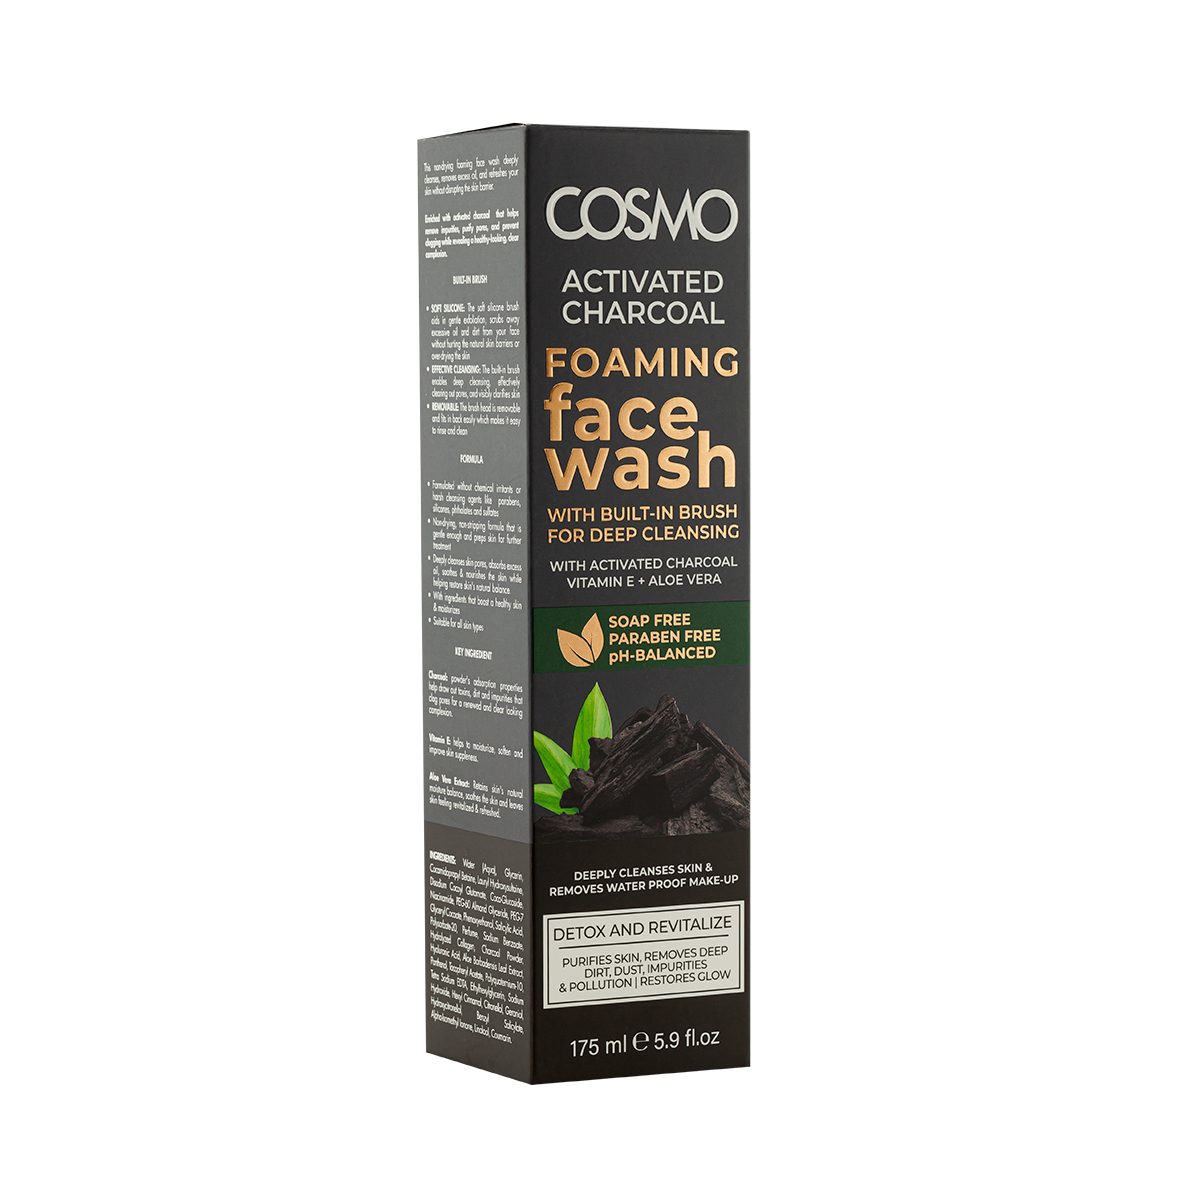 ACTIVATED CHARCOAL FOAMING FACE WASH - 175ML